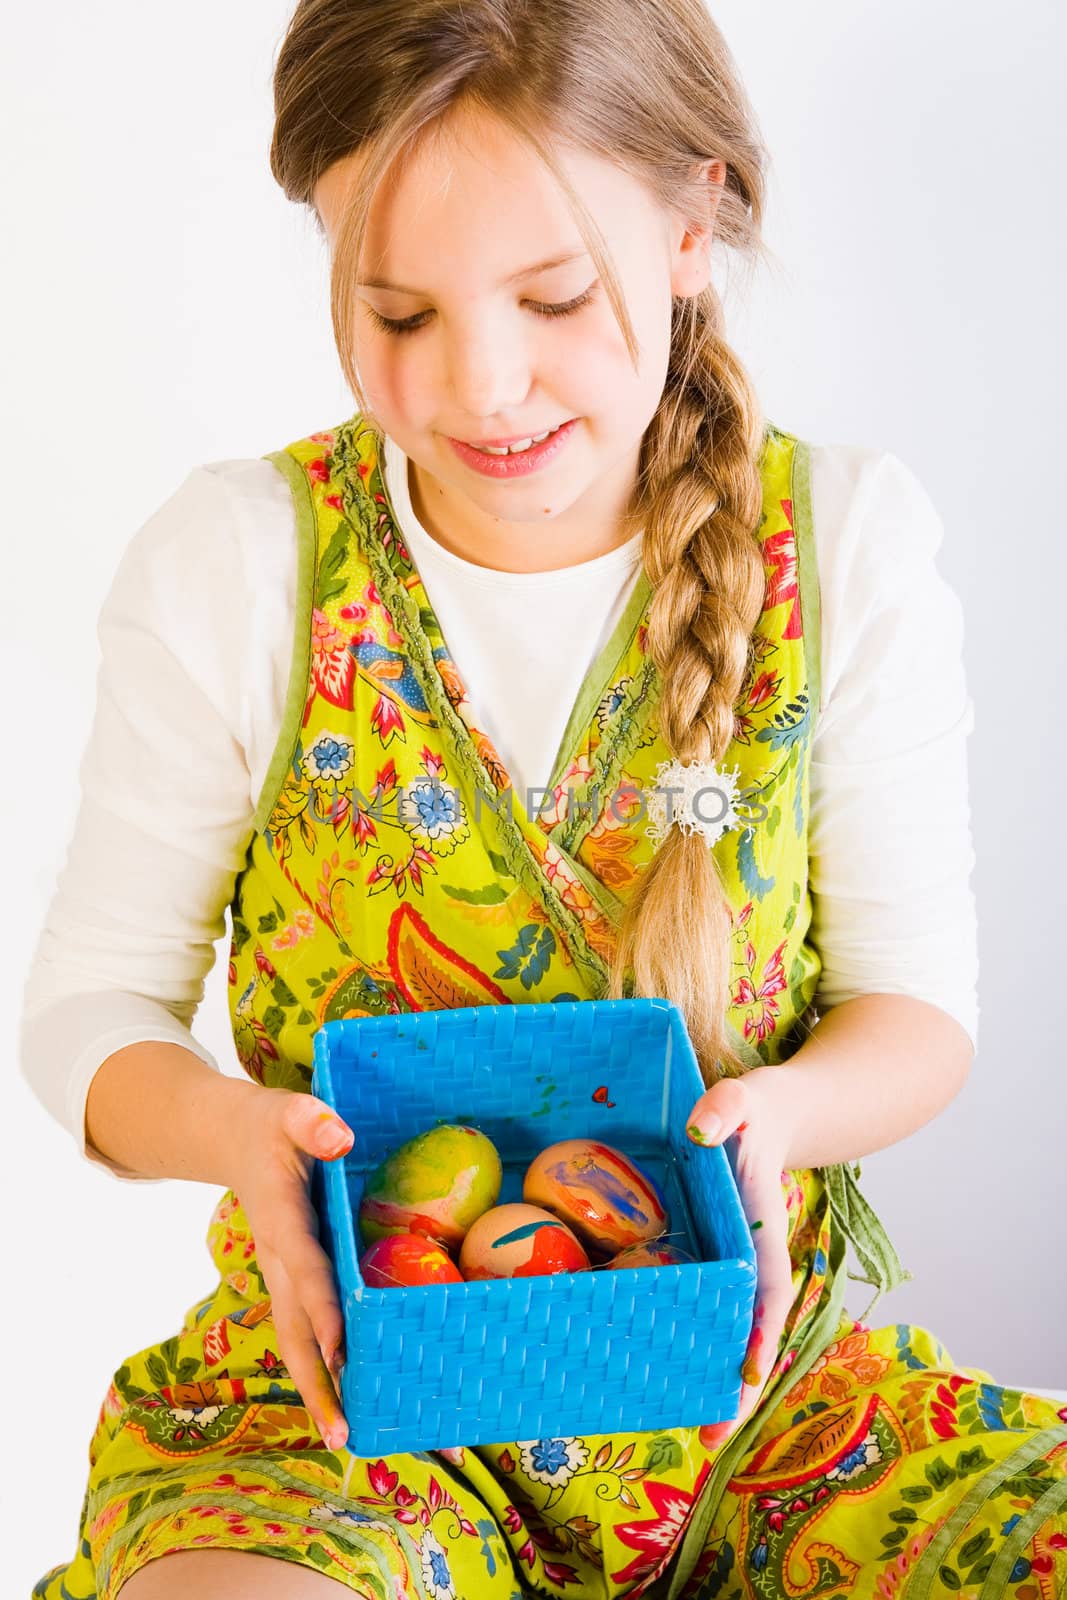 Studio portrait of a young blond girl who is shwong a box full of easter eggs